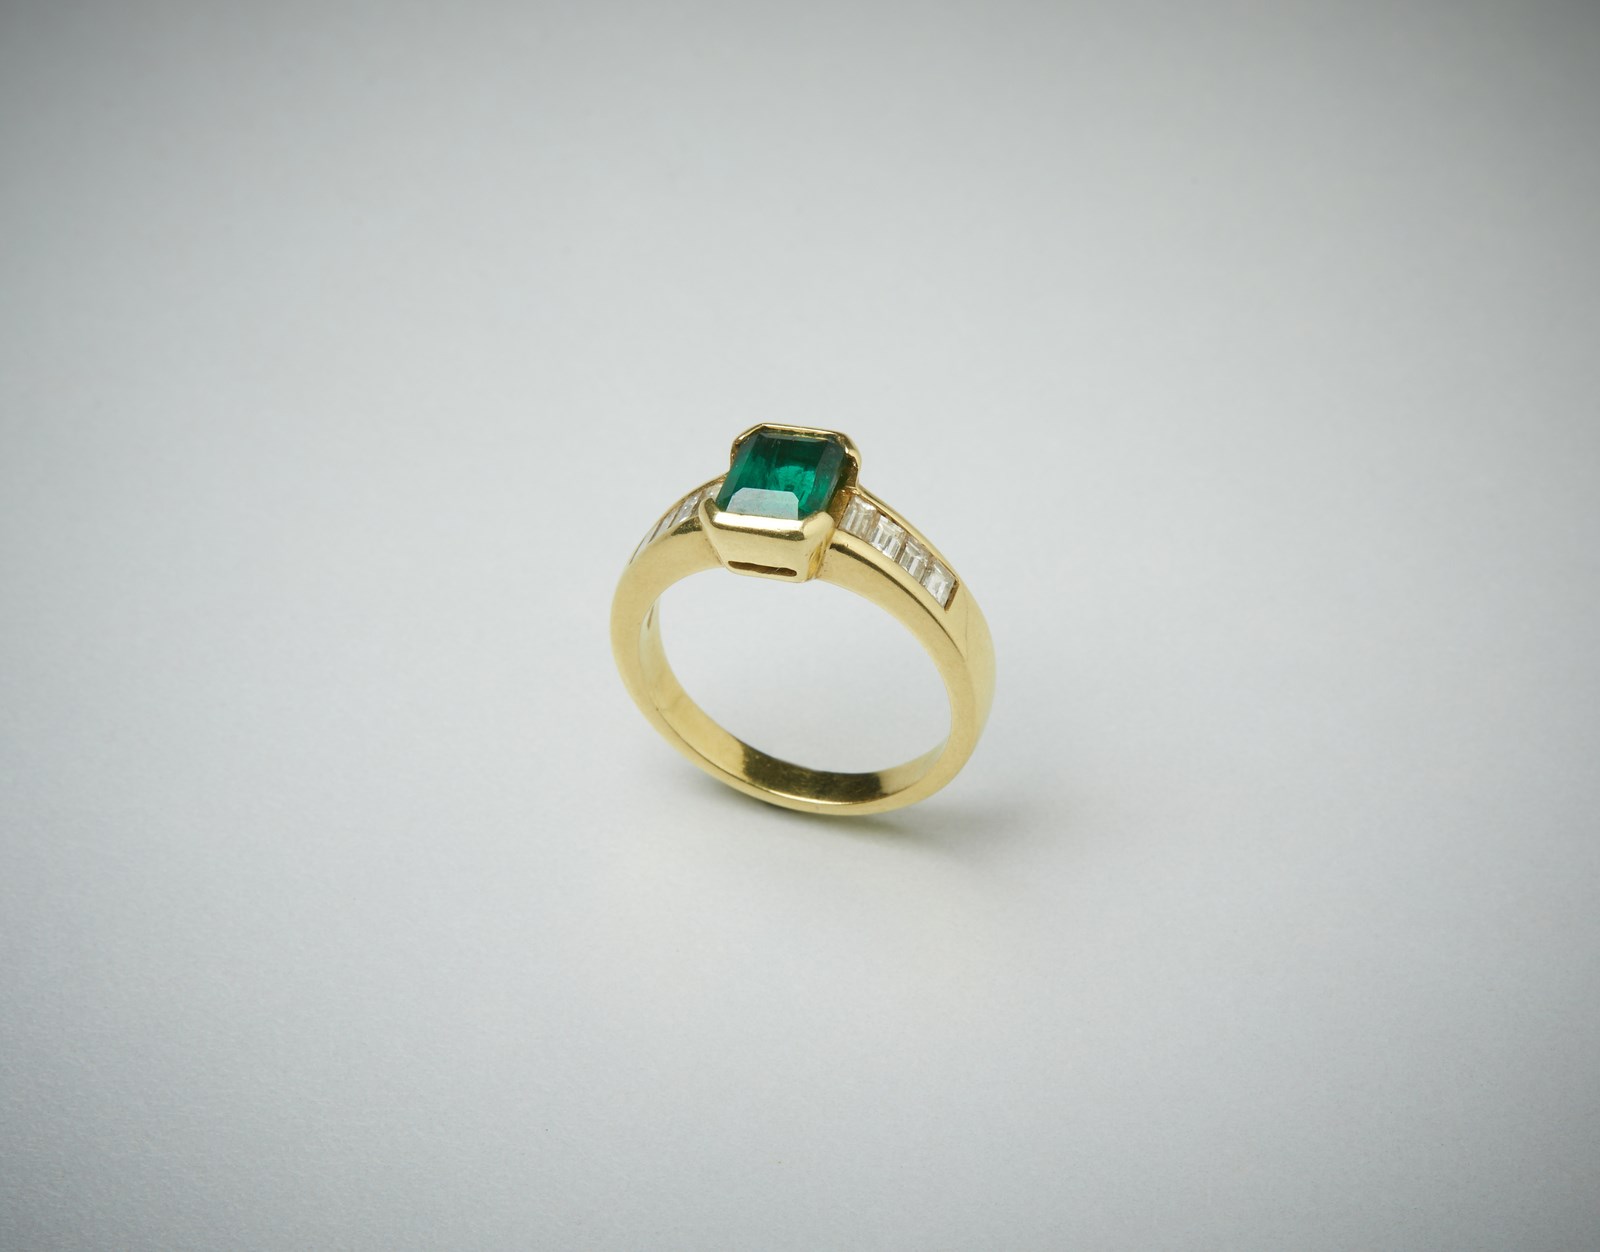 Ring in yellow gold 750/1000 with emerald cut and baguettes cut diamonds.  (. )